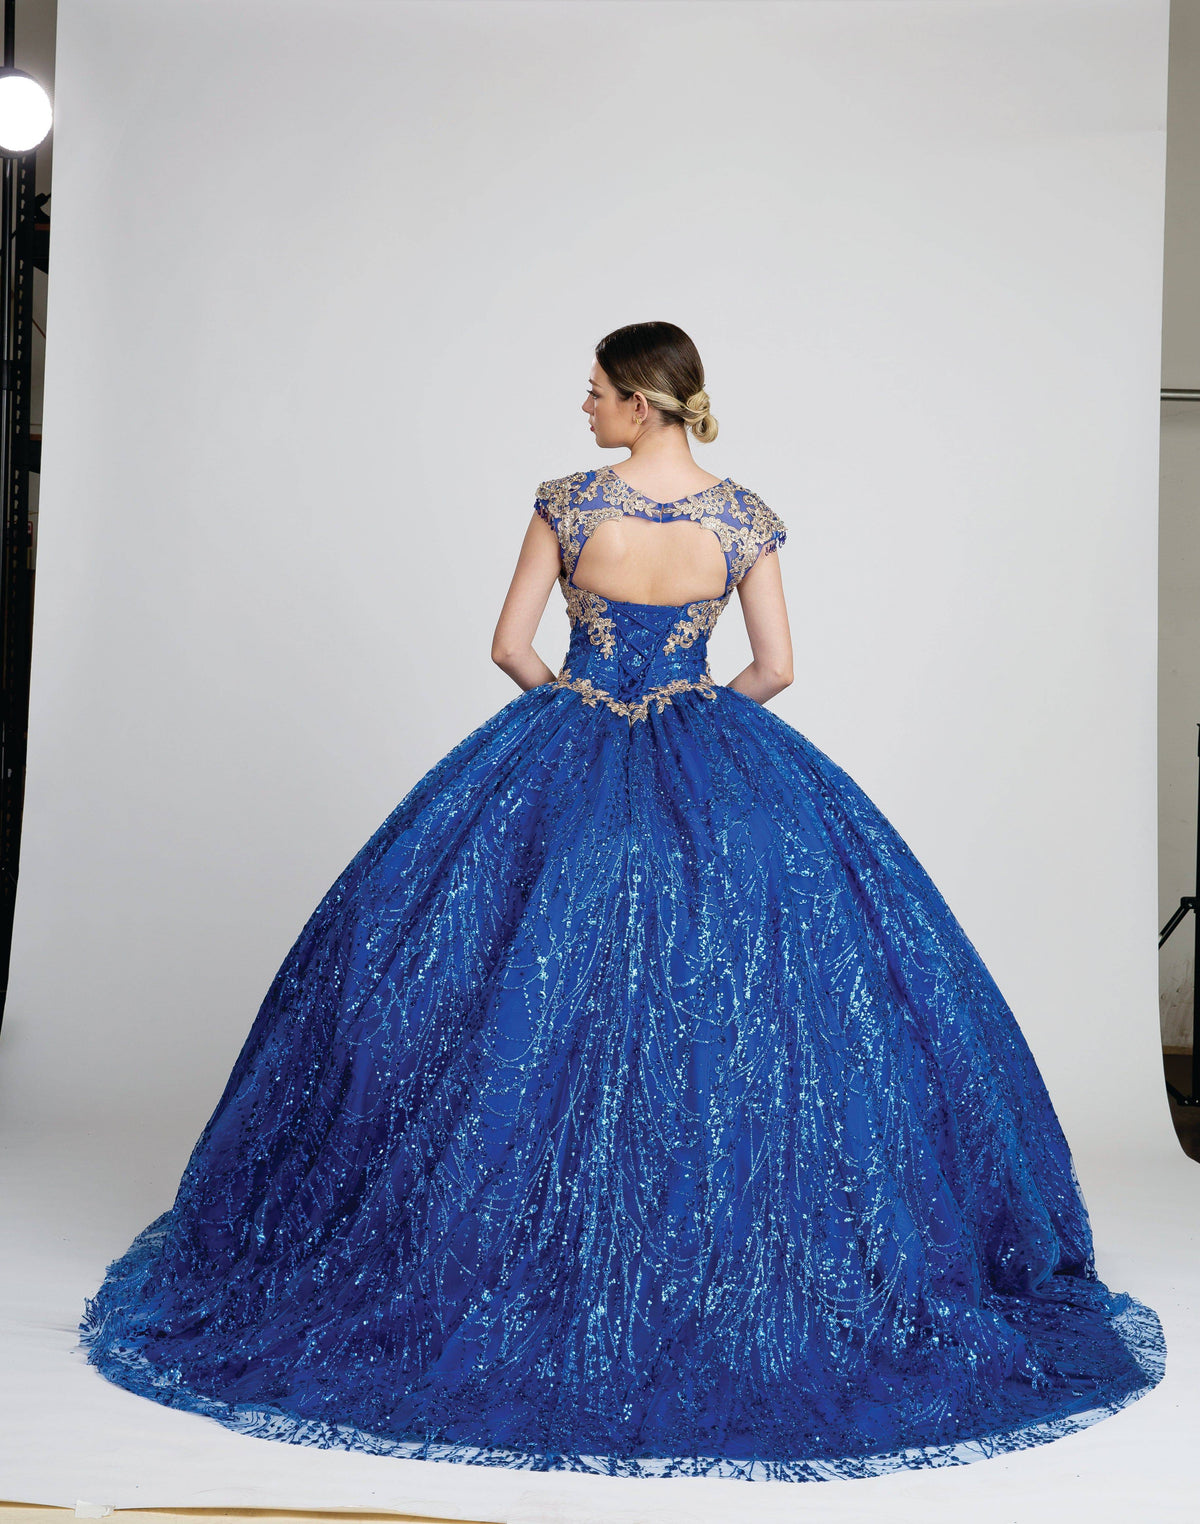 Fiesta 10262 Sequin & Floral Lace Embroidered Ball Gown - NORMA REED